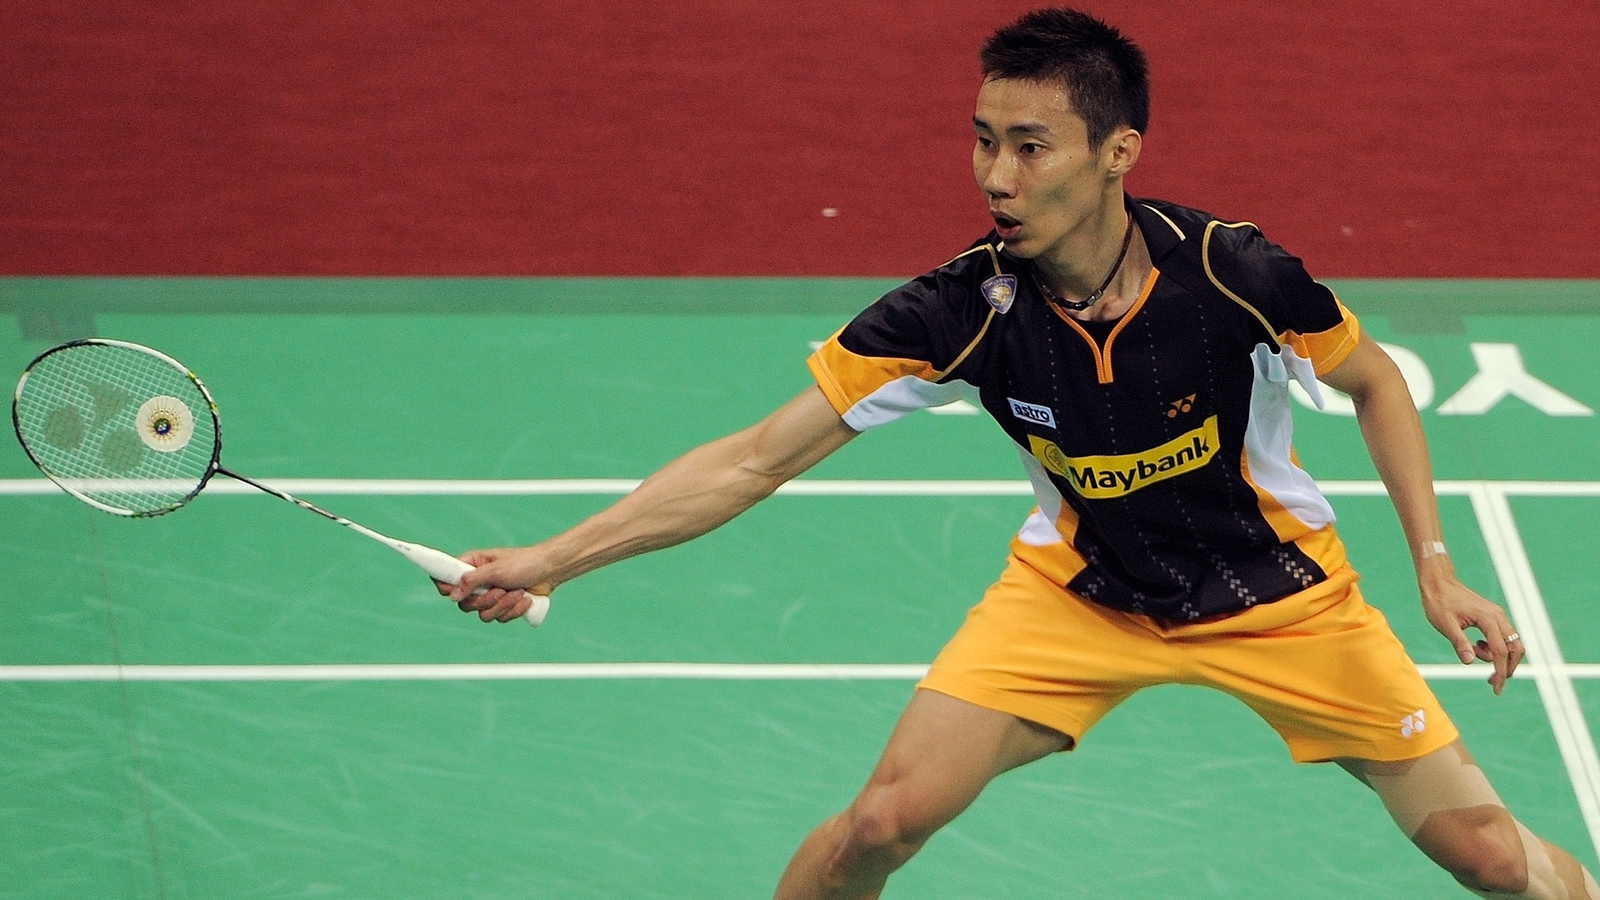 Lee Chong Wei racing against time